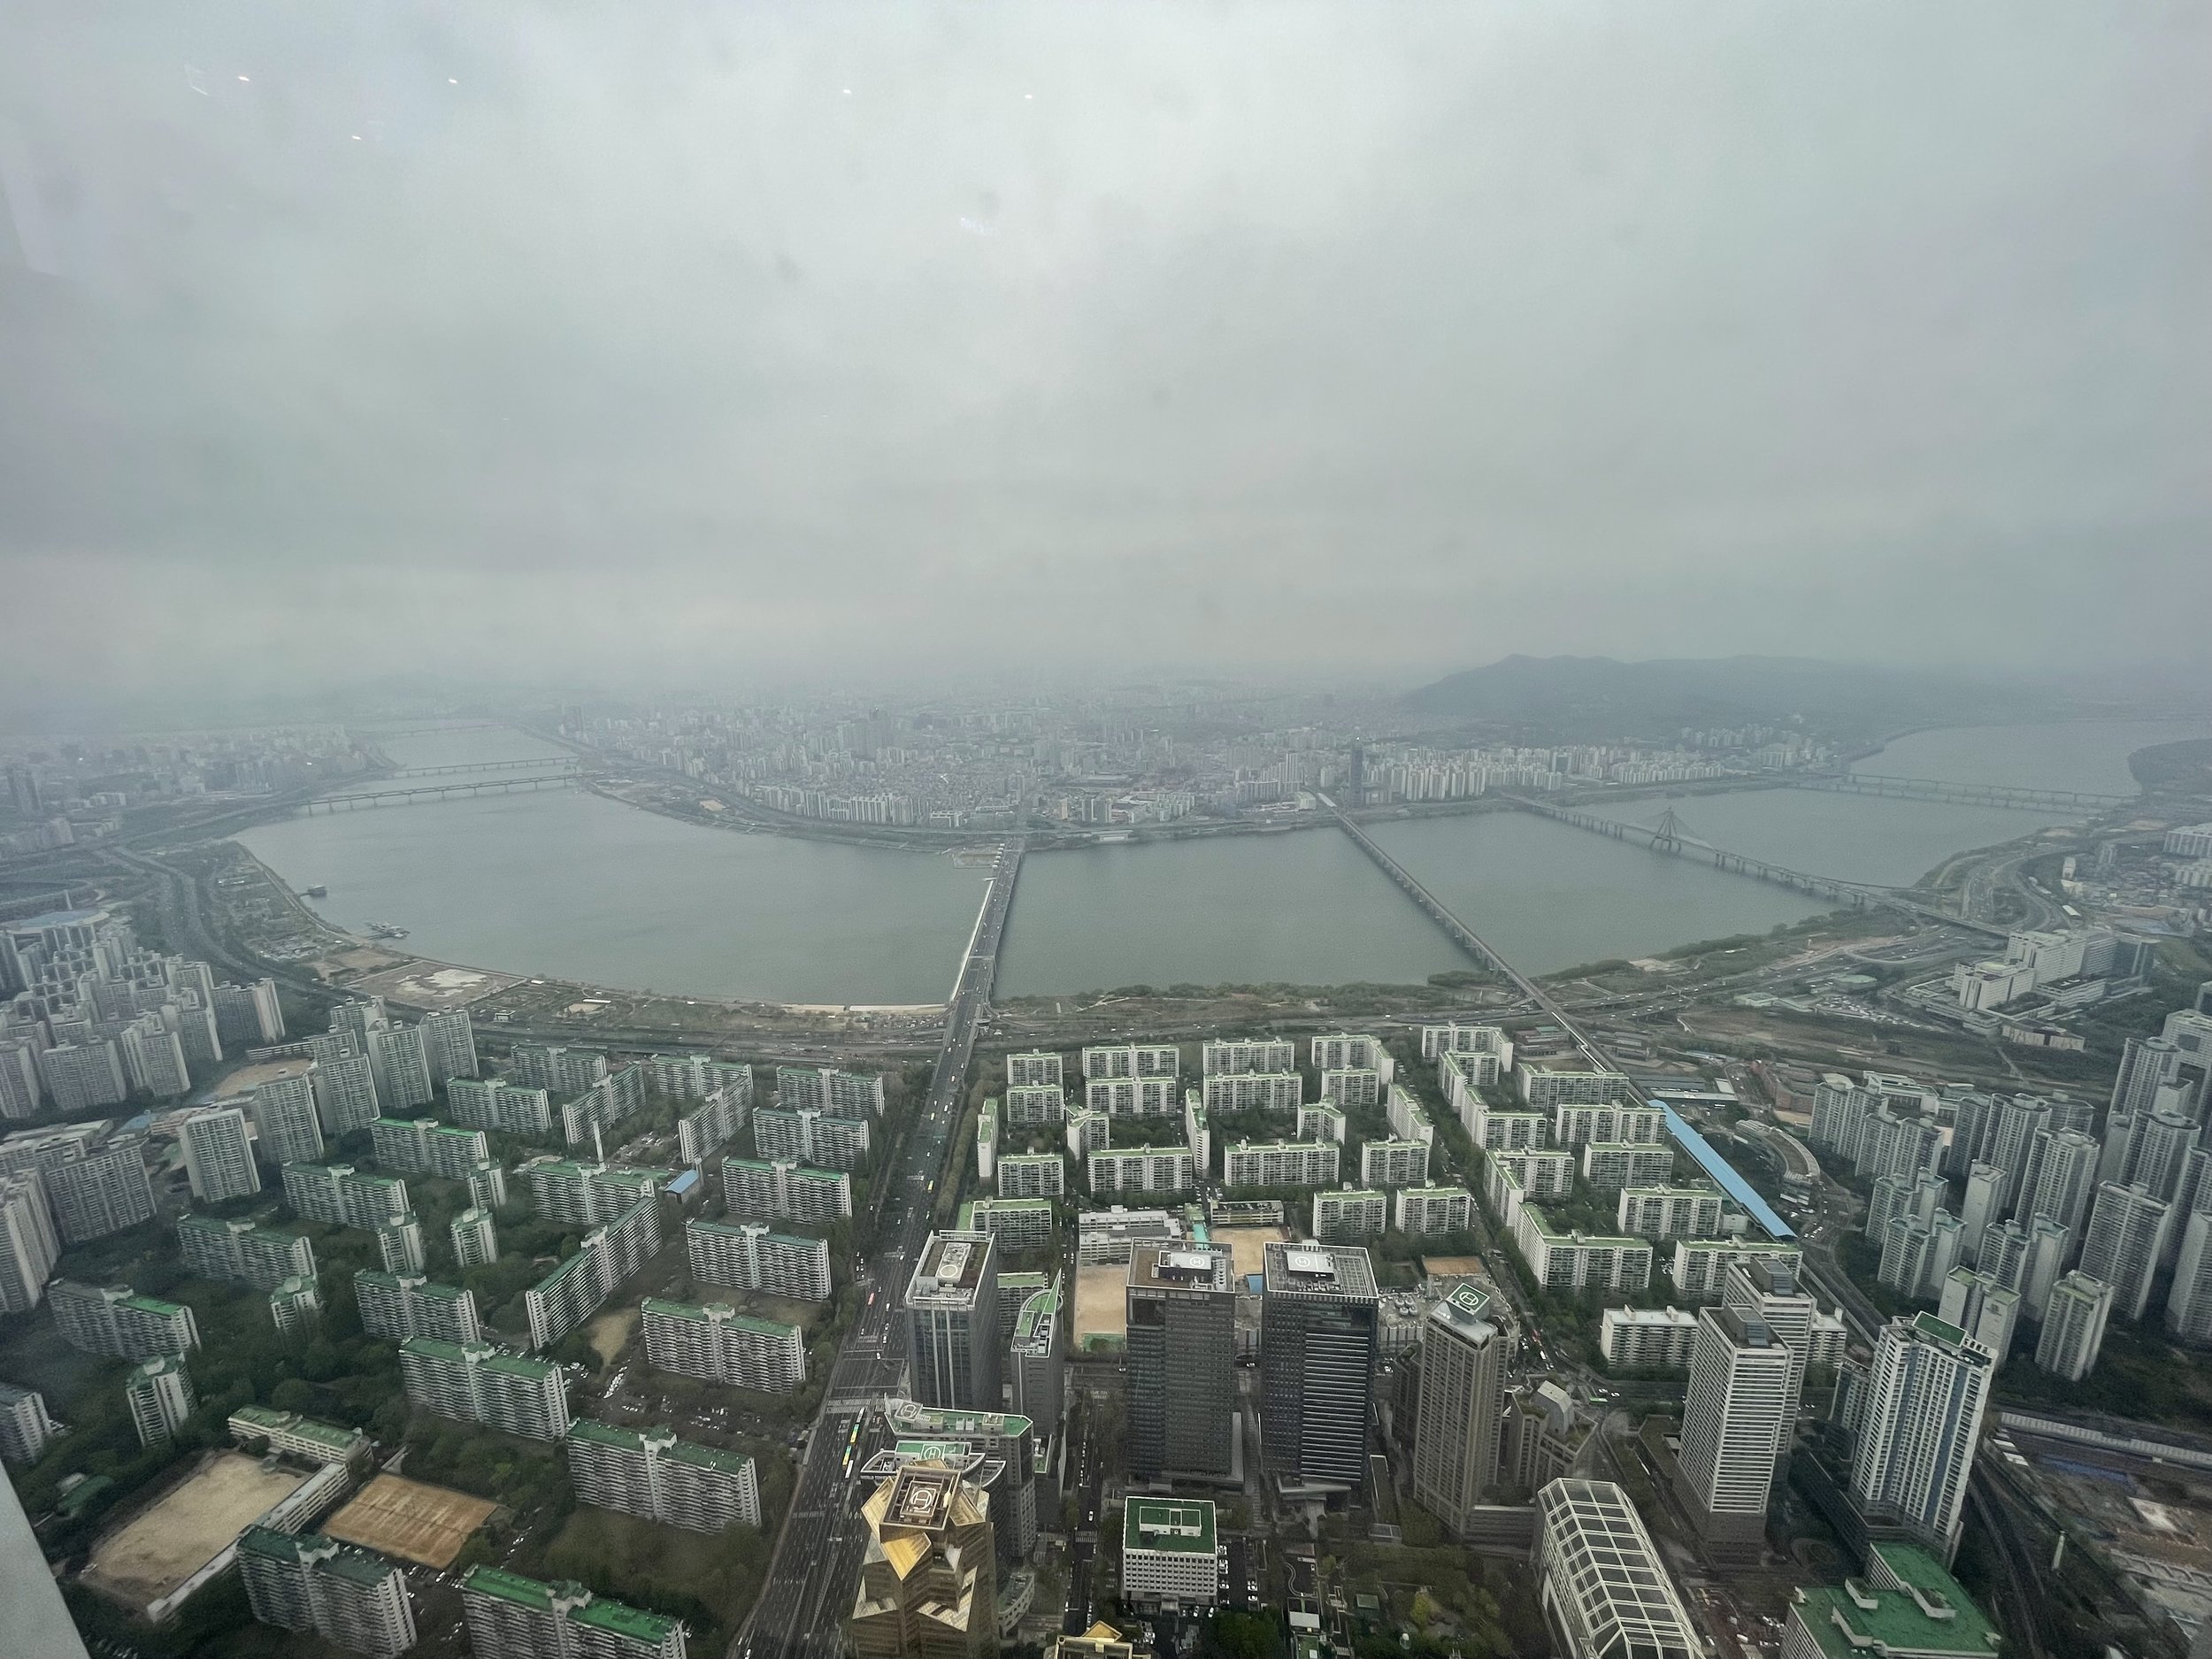 View looking north from Lotte World Tower